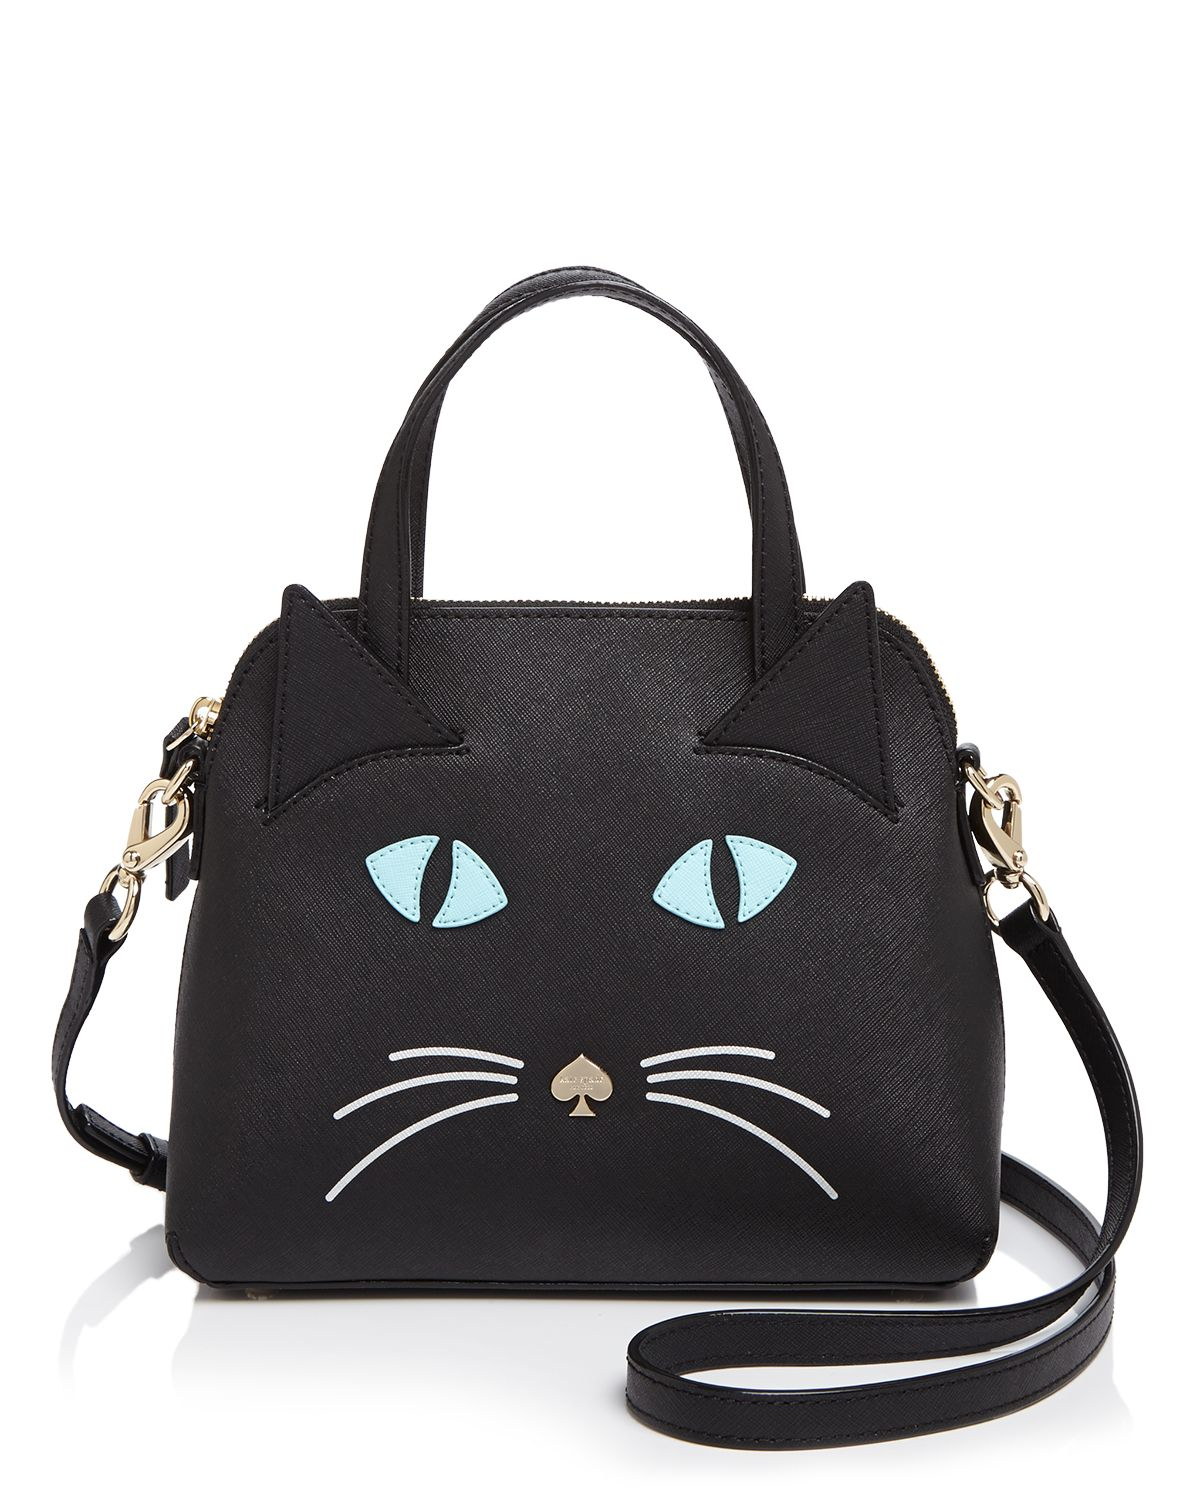 Lyst - Kate Spade New York Cats Meow Small Maise Satchel in Black